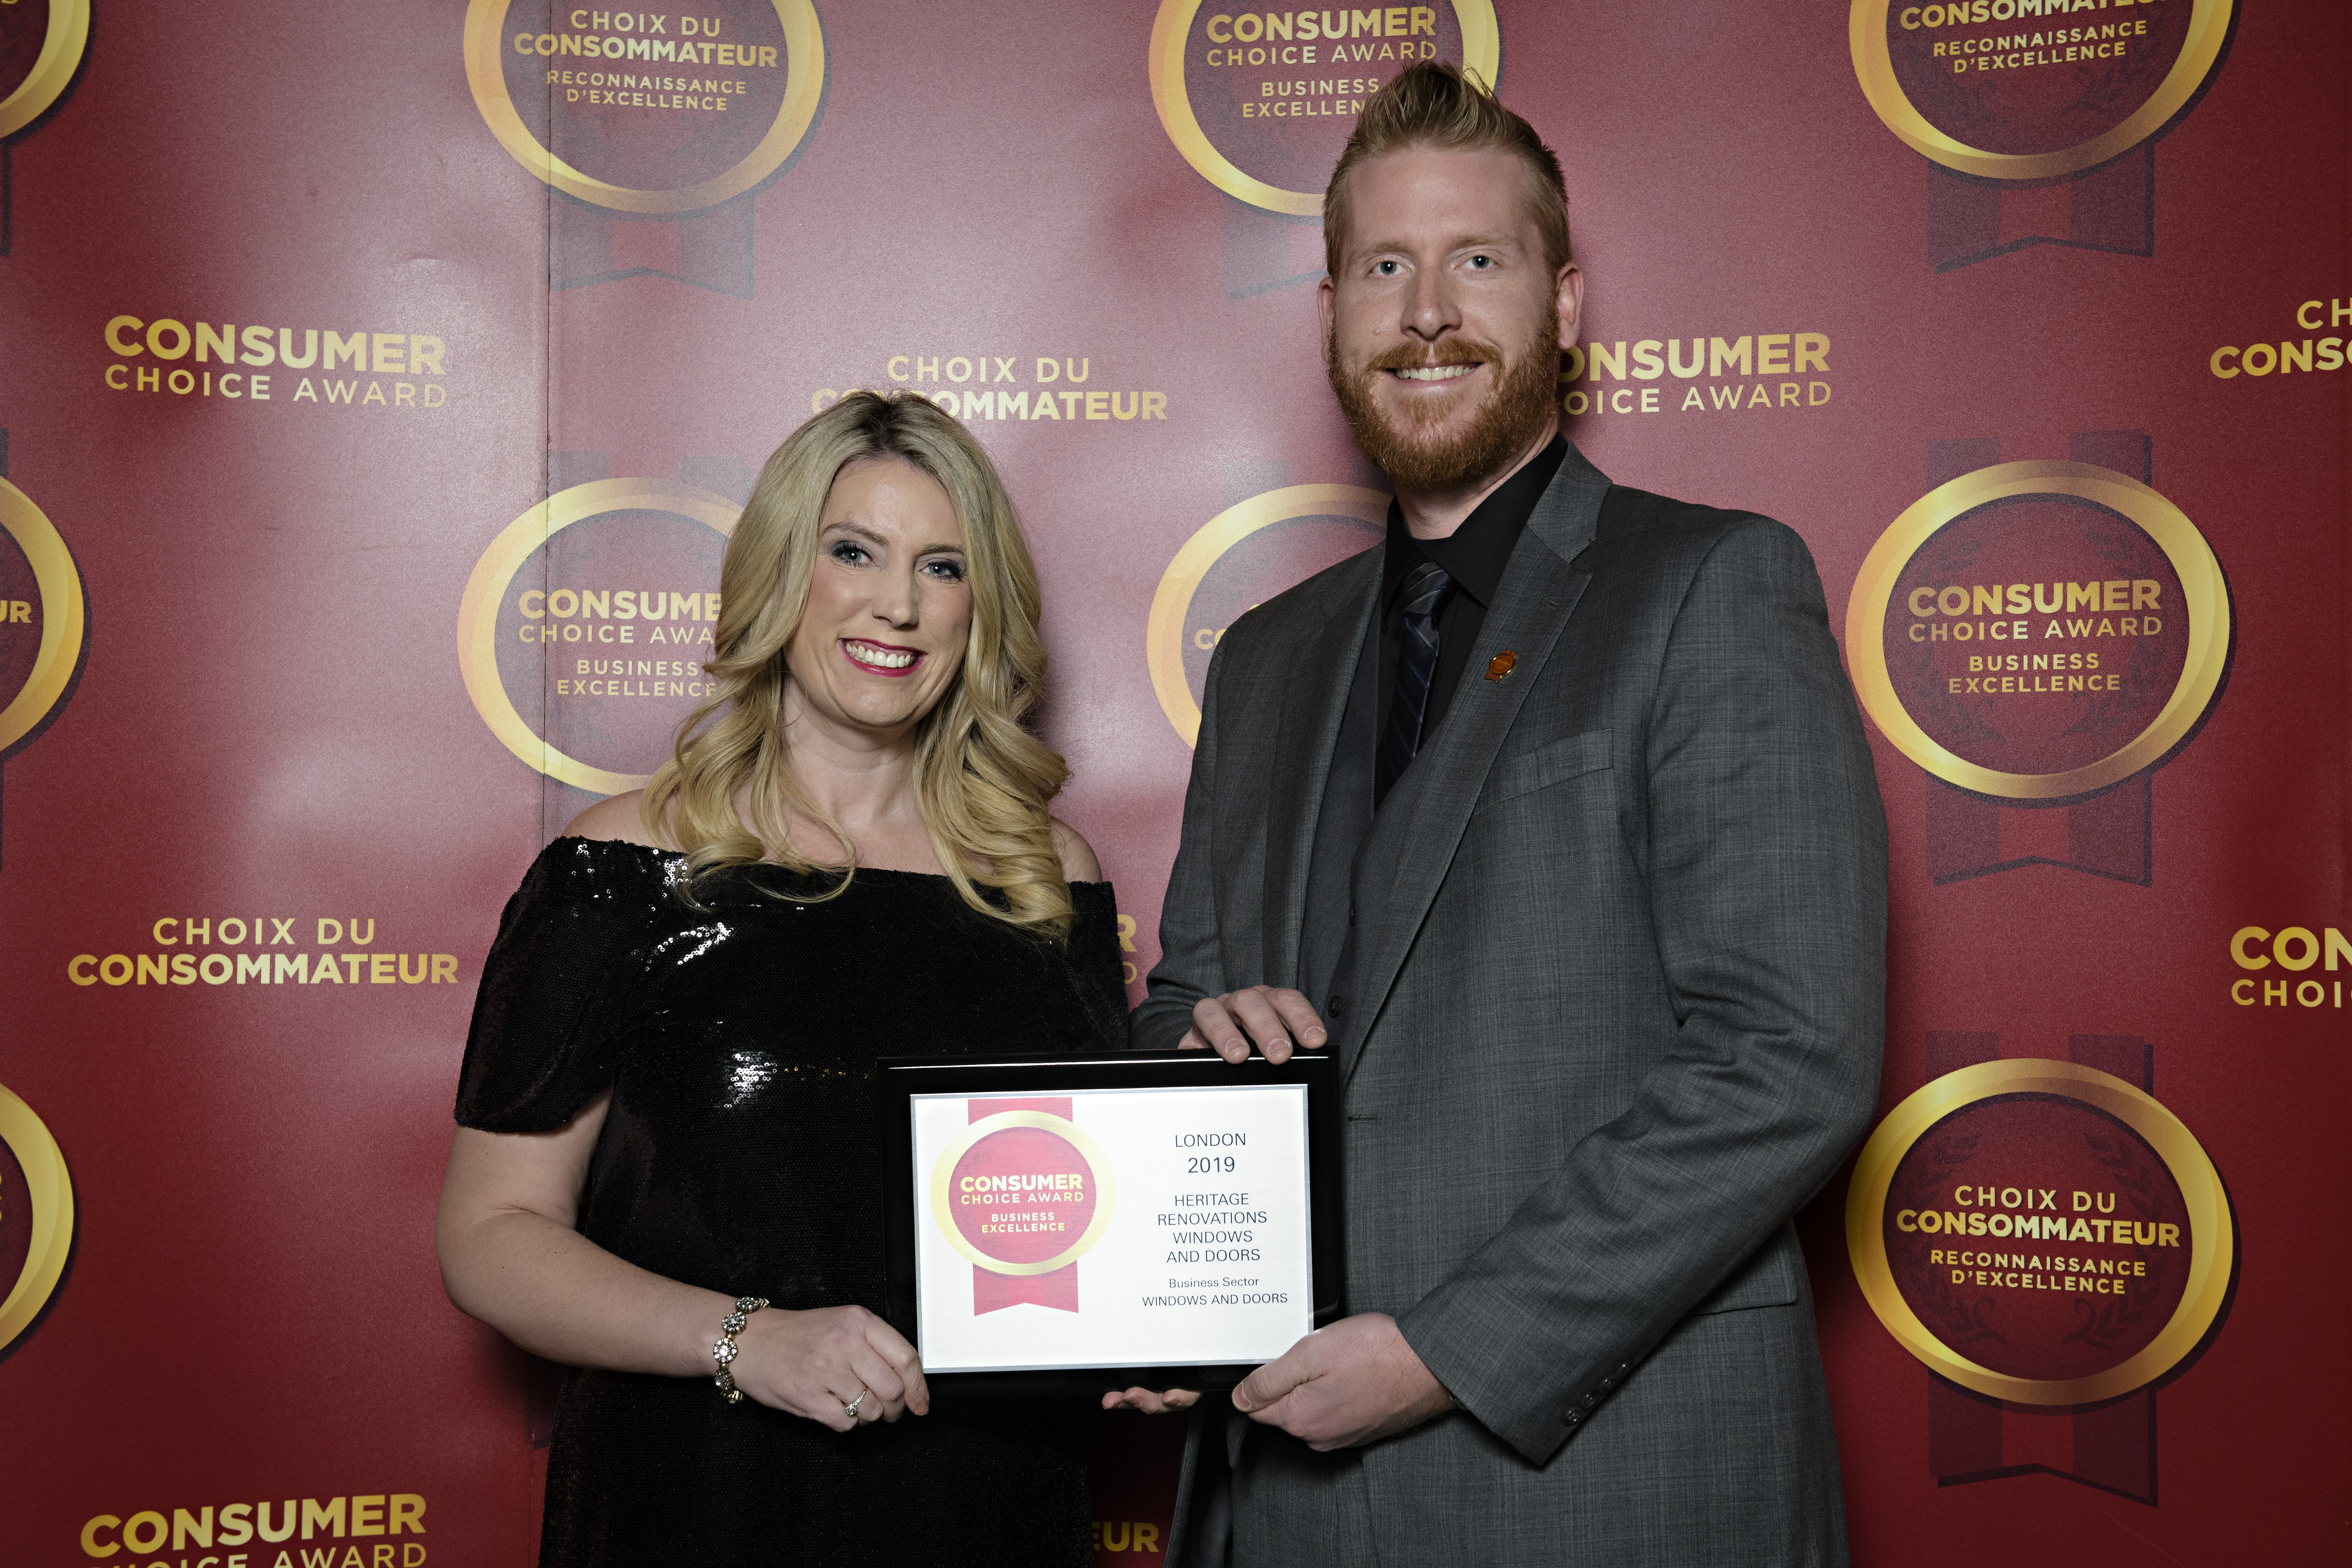 Consumer Choice Award, Friday, November 22, 2019, Press release picture